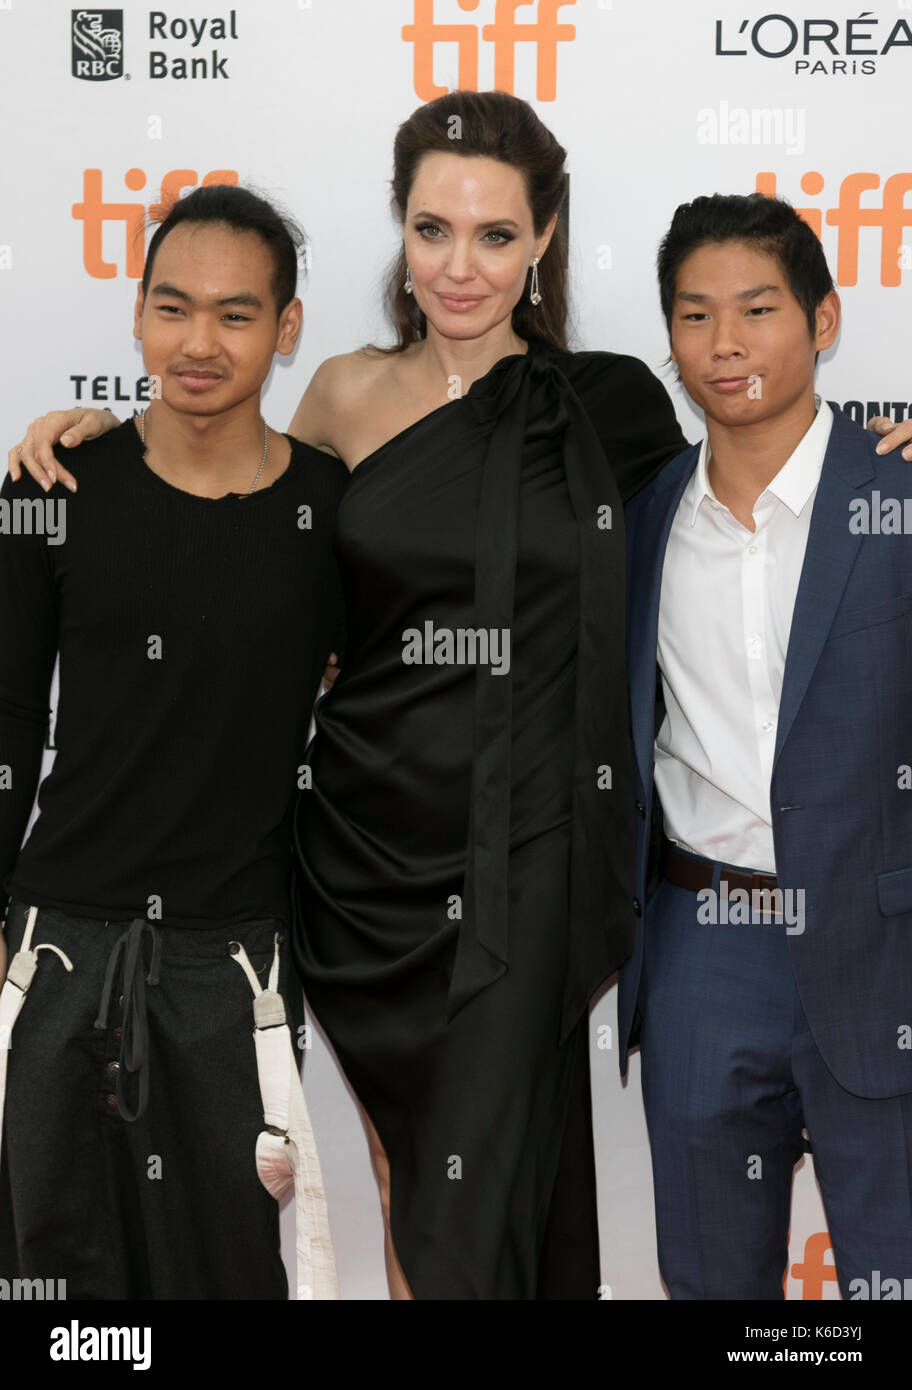 Toronto, Canada. 11th Sep, 2017. Maddox Jolie-Pitt (l-r), Angelina Jolie and Pax Thien Jolie-Pitt attend the premiere of 'First They Killed My Father' during the 42nd Toronto International Film Festival, tiff, at Princess of Wales Theatre in Toronto, Canada, on 11 September 2017. · NO WIRE SERVICE · Photo: Hubert Boesl/dpa/Alamy Live News Stock Photo